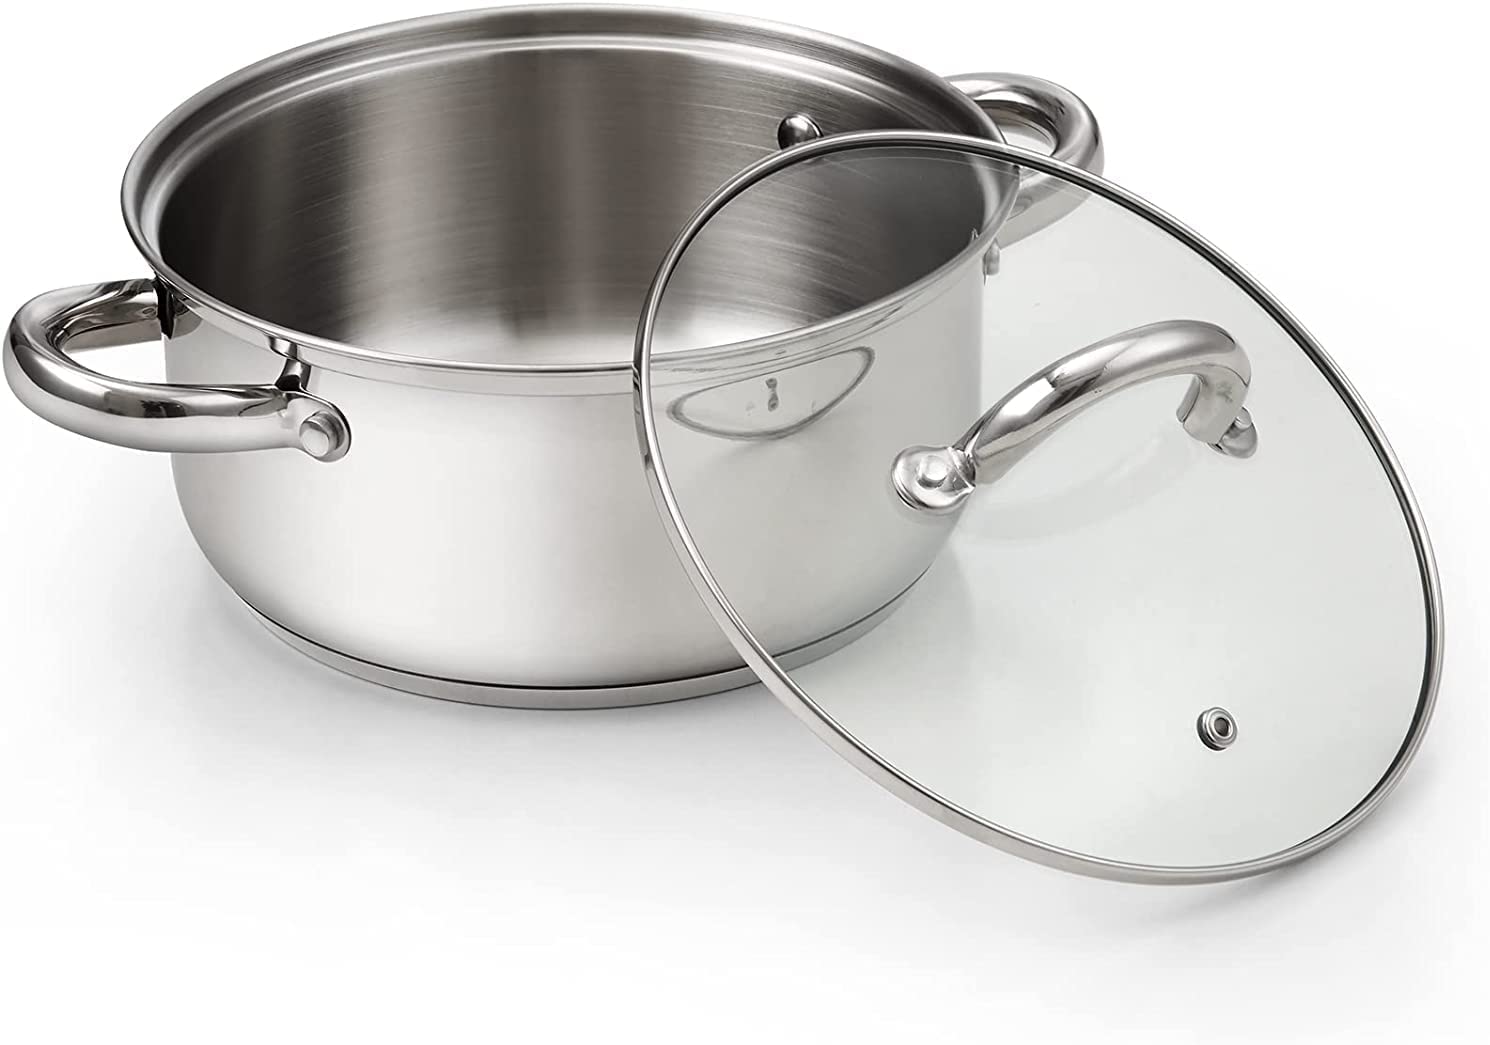  Cook N Home Stainless Cookware Sets Basic Pots and